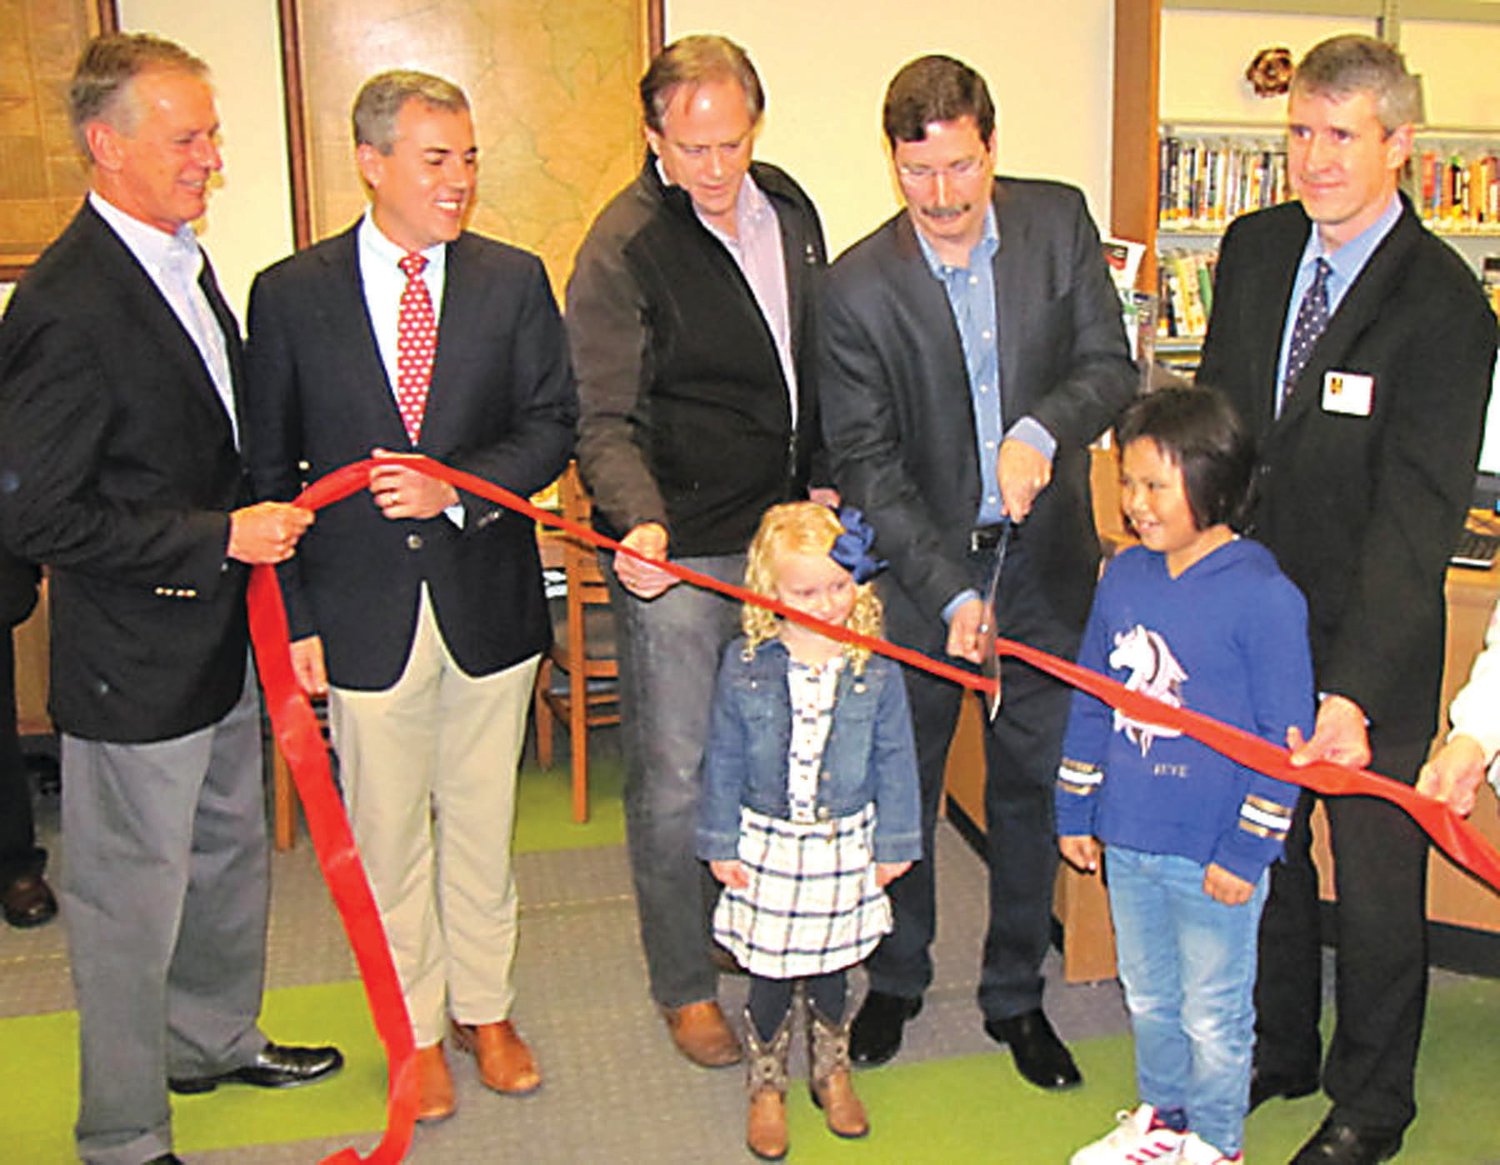 From left, John W. King, John E. Lanza, Matt Holt, Mayor Tim Mathews and James Keehbler join with East Amwell school children to cut the ribbon for the South County Library.